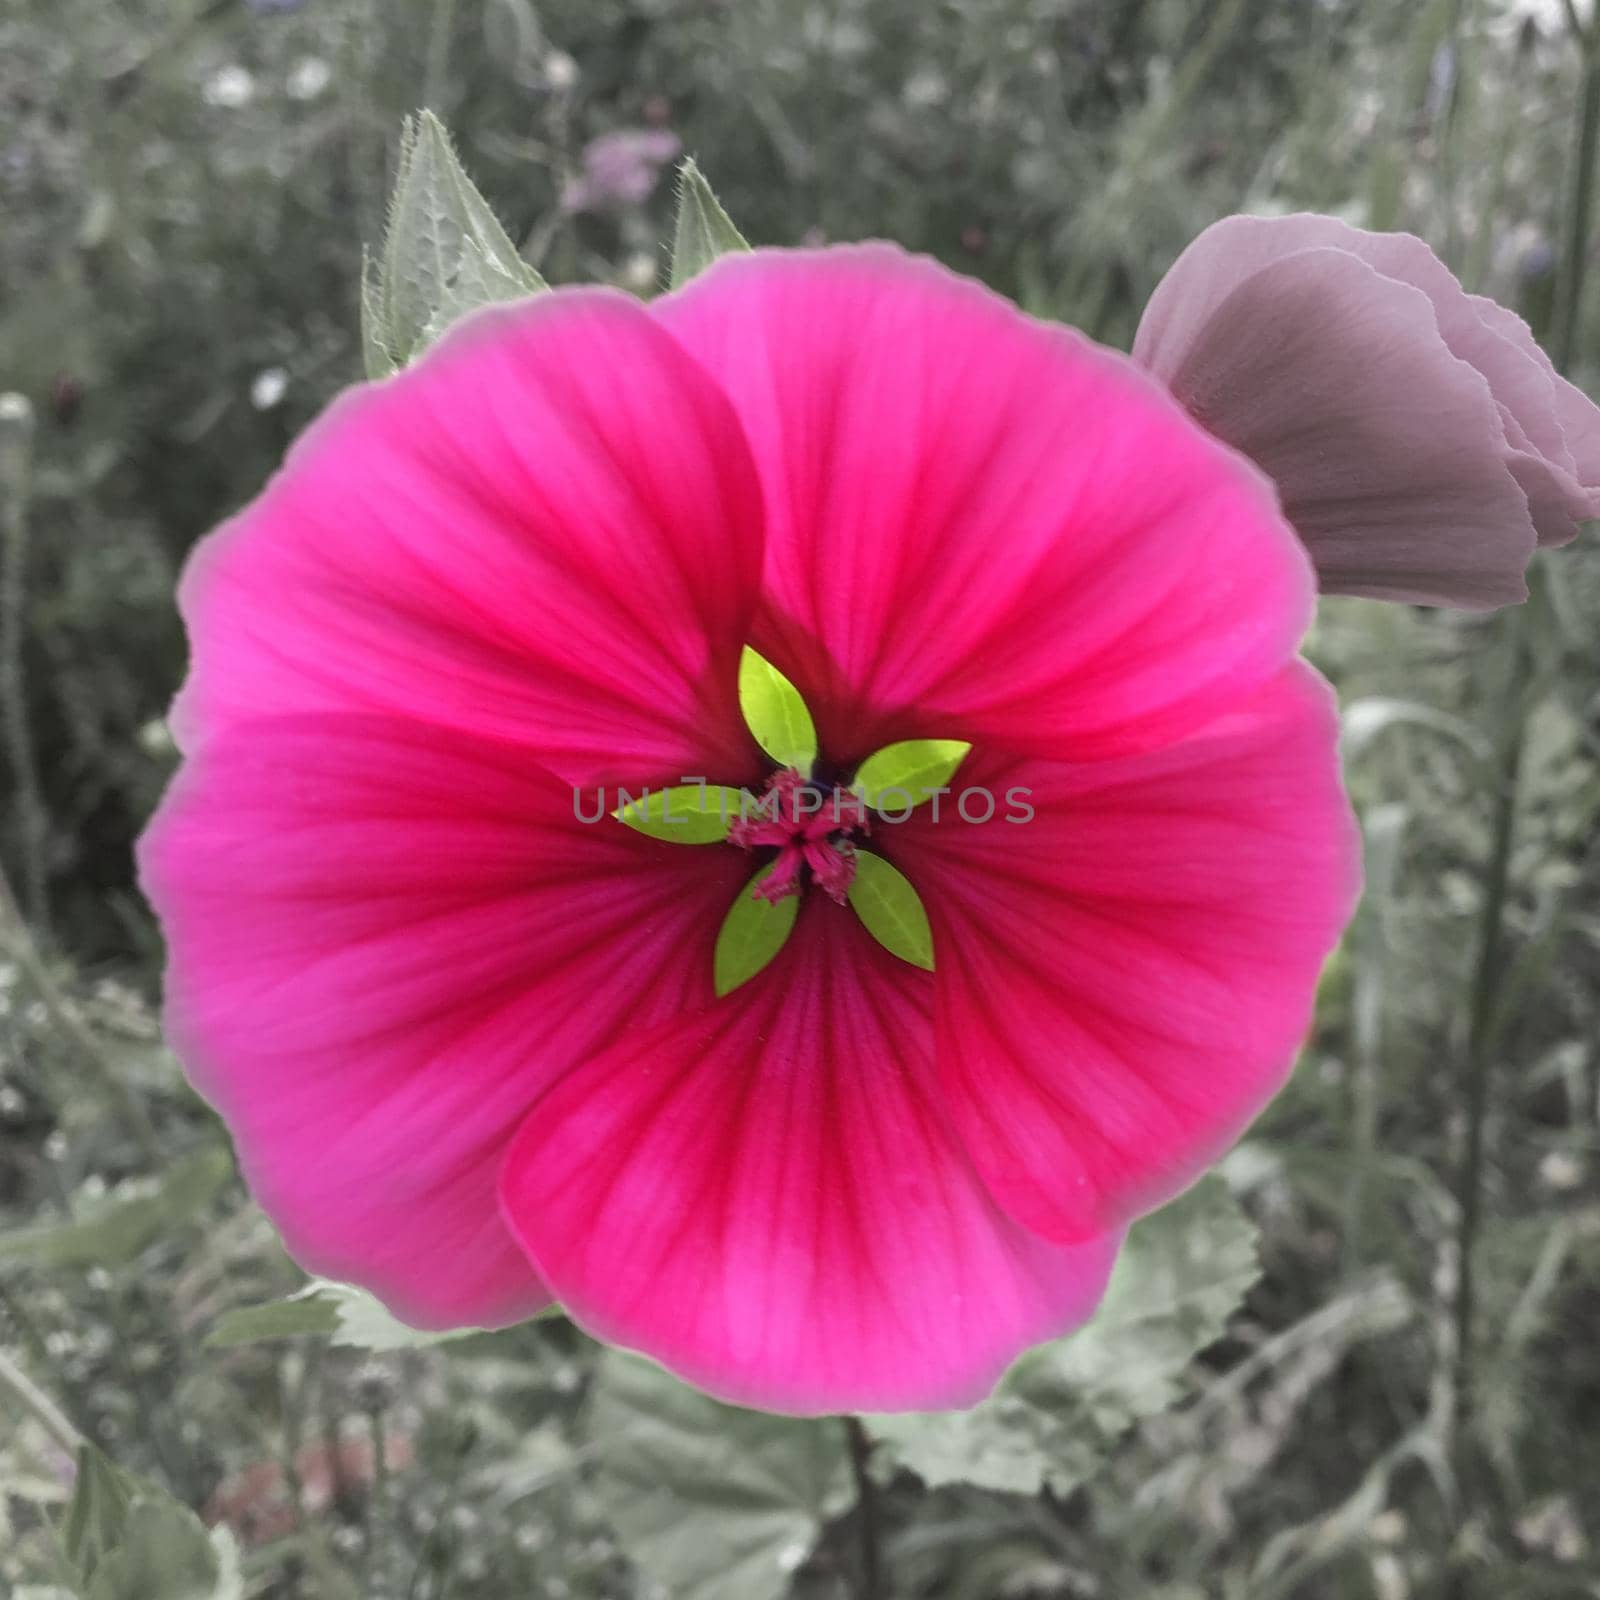 A round pink flower, The background is made less saturated